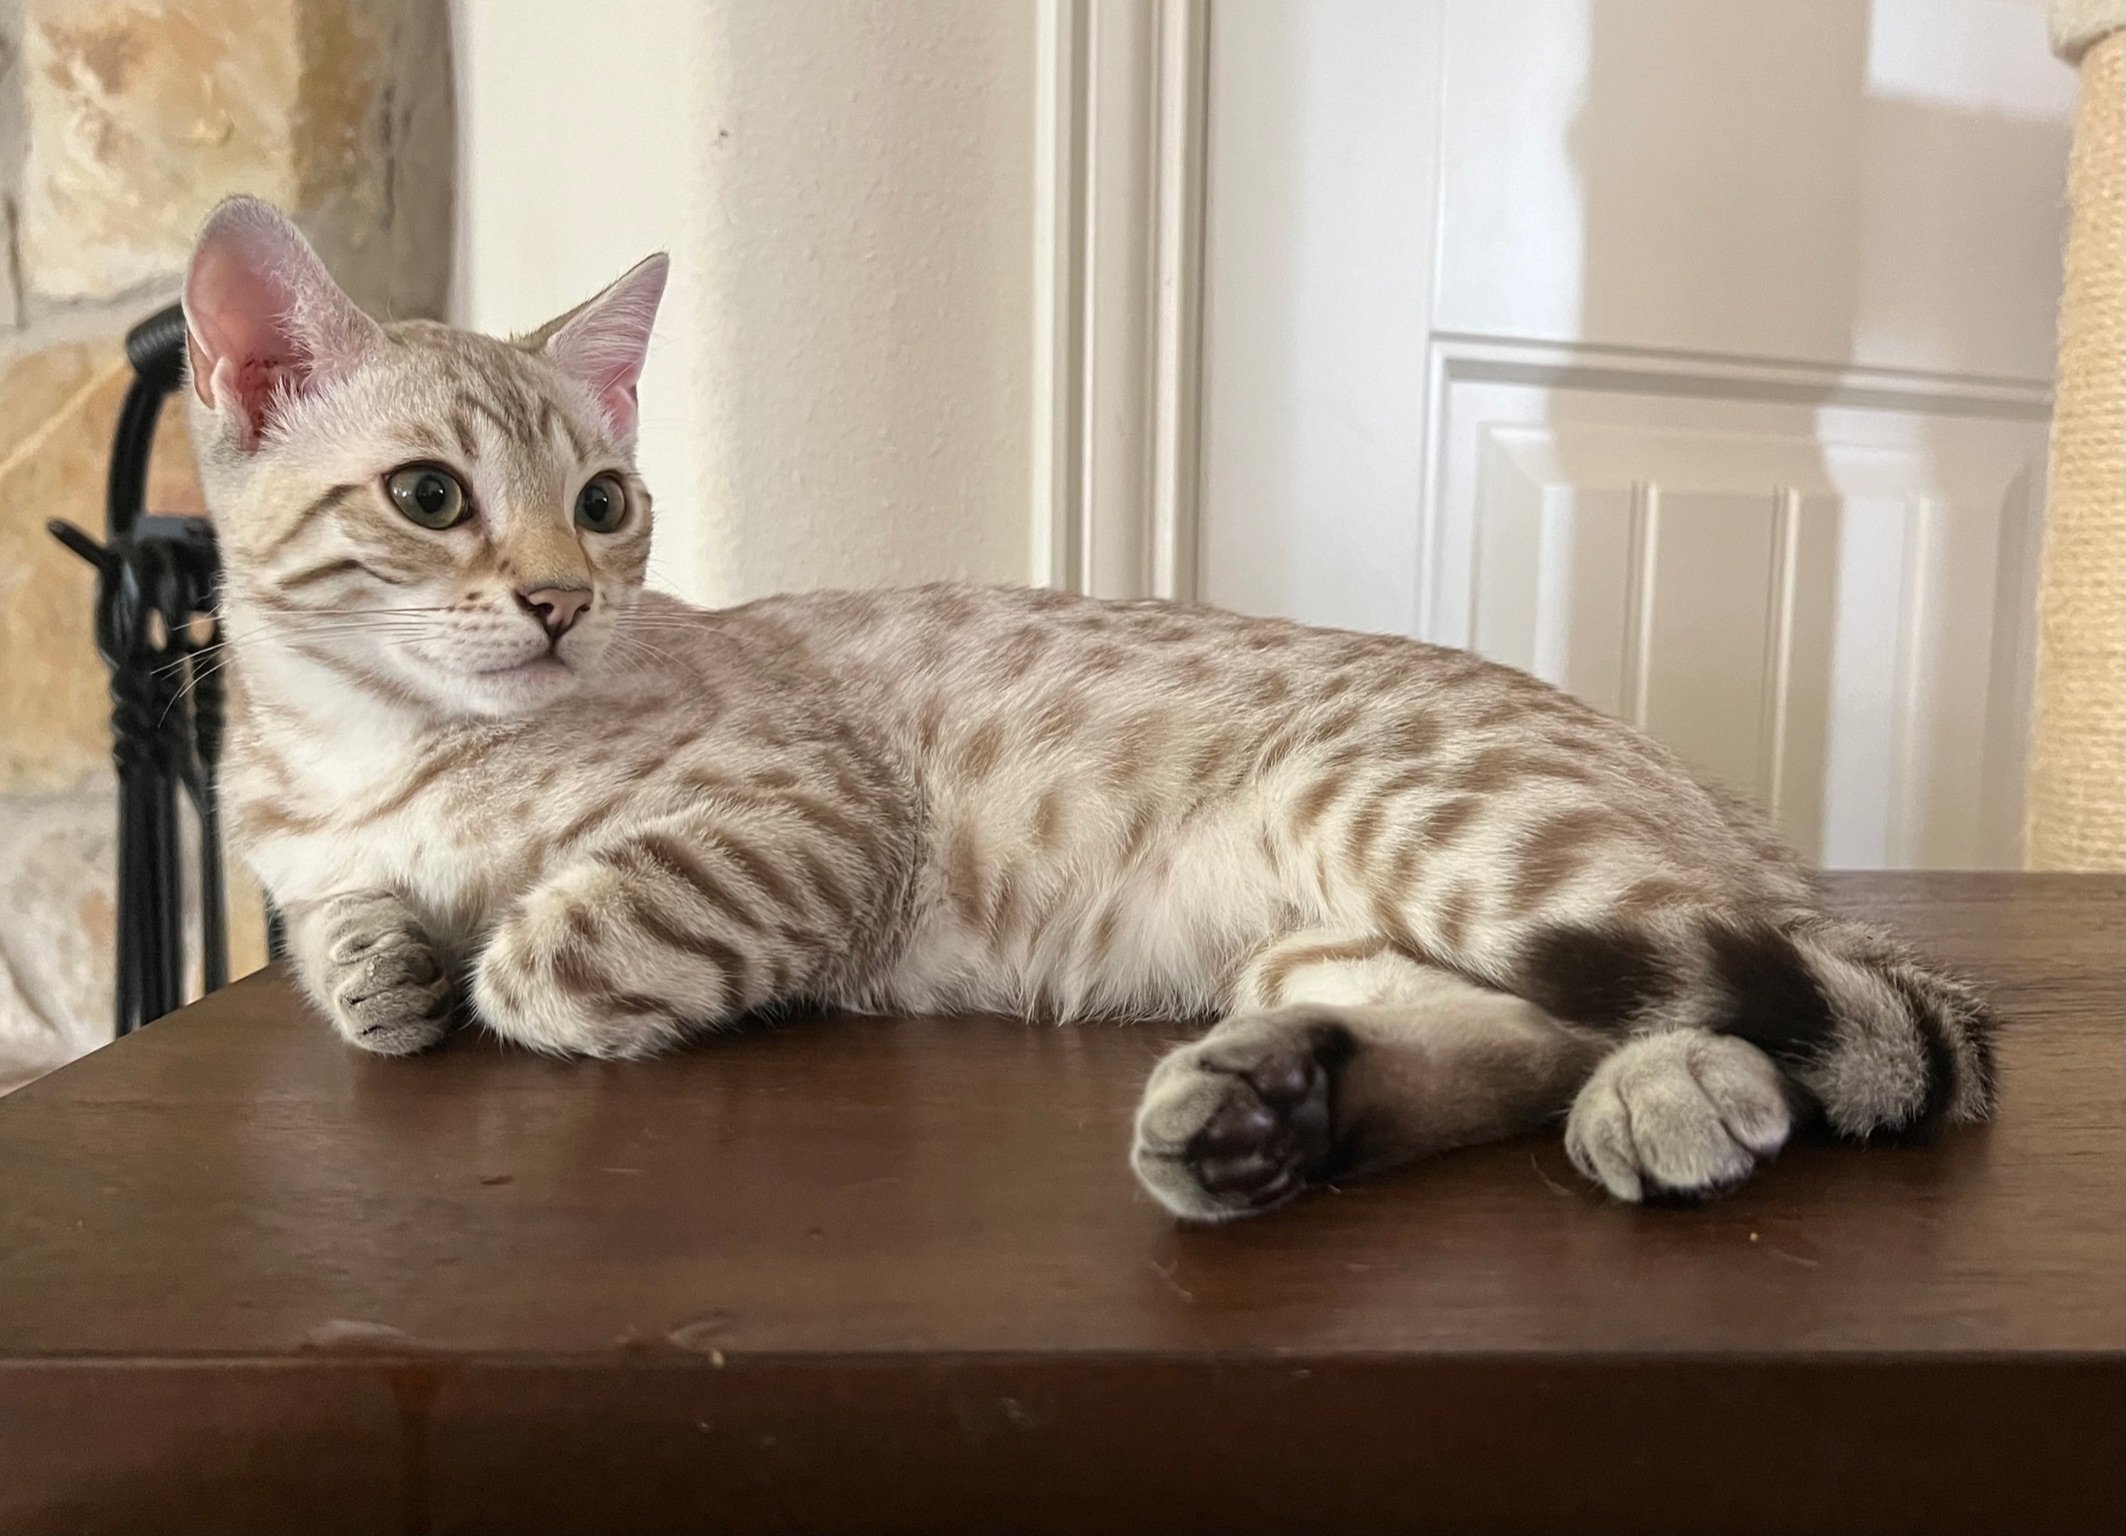 An award-winning Bengal breeder's lone star kitten lounging on a table.